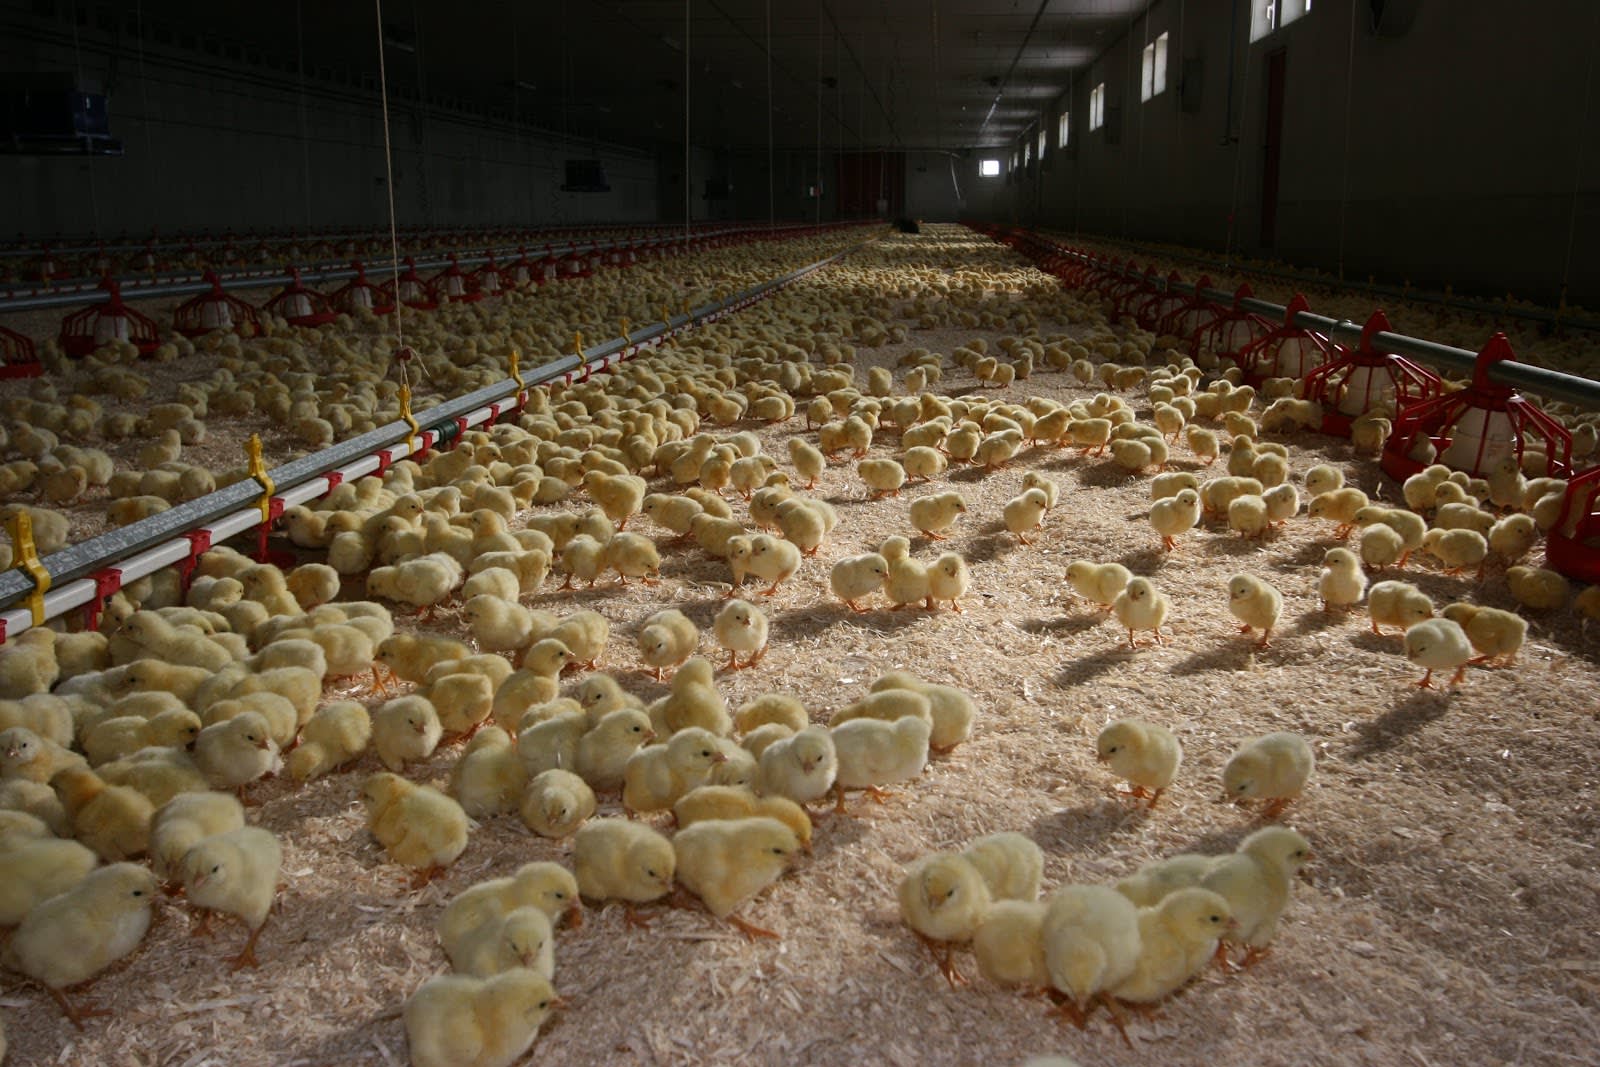 Chicks being raised in an intensive farm